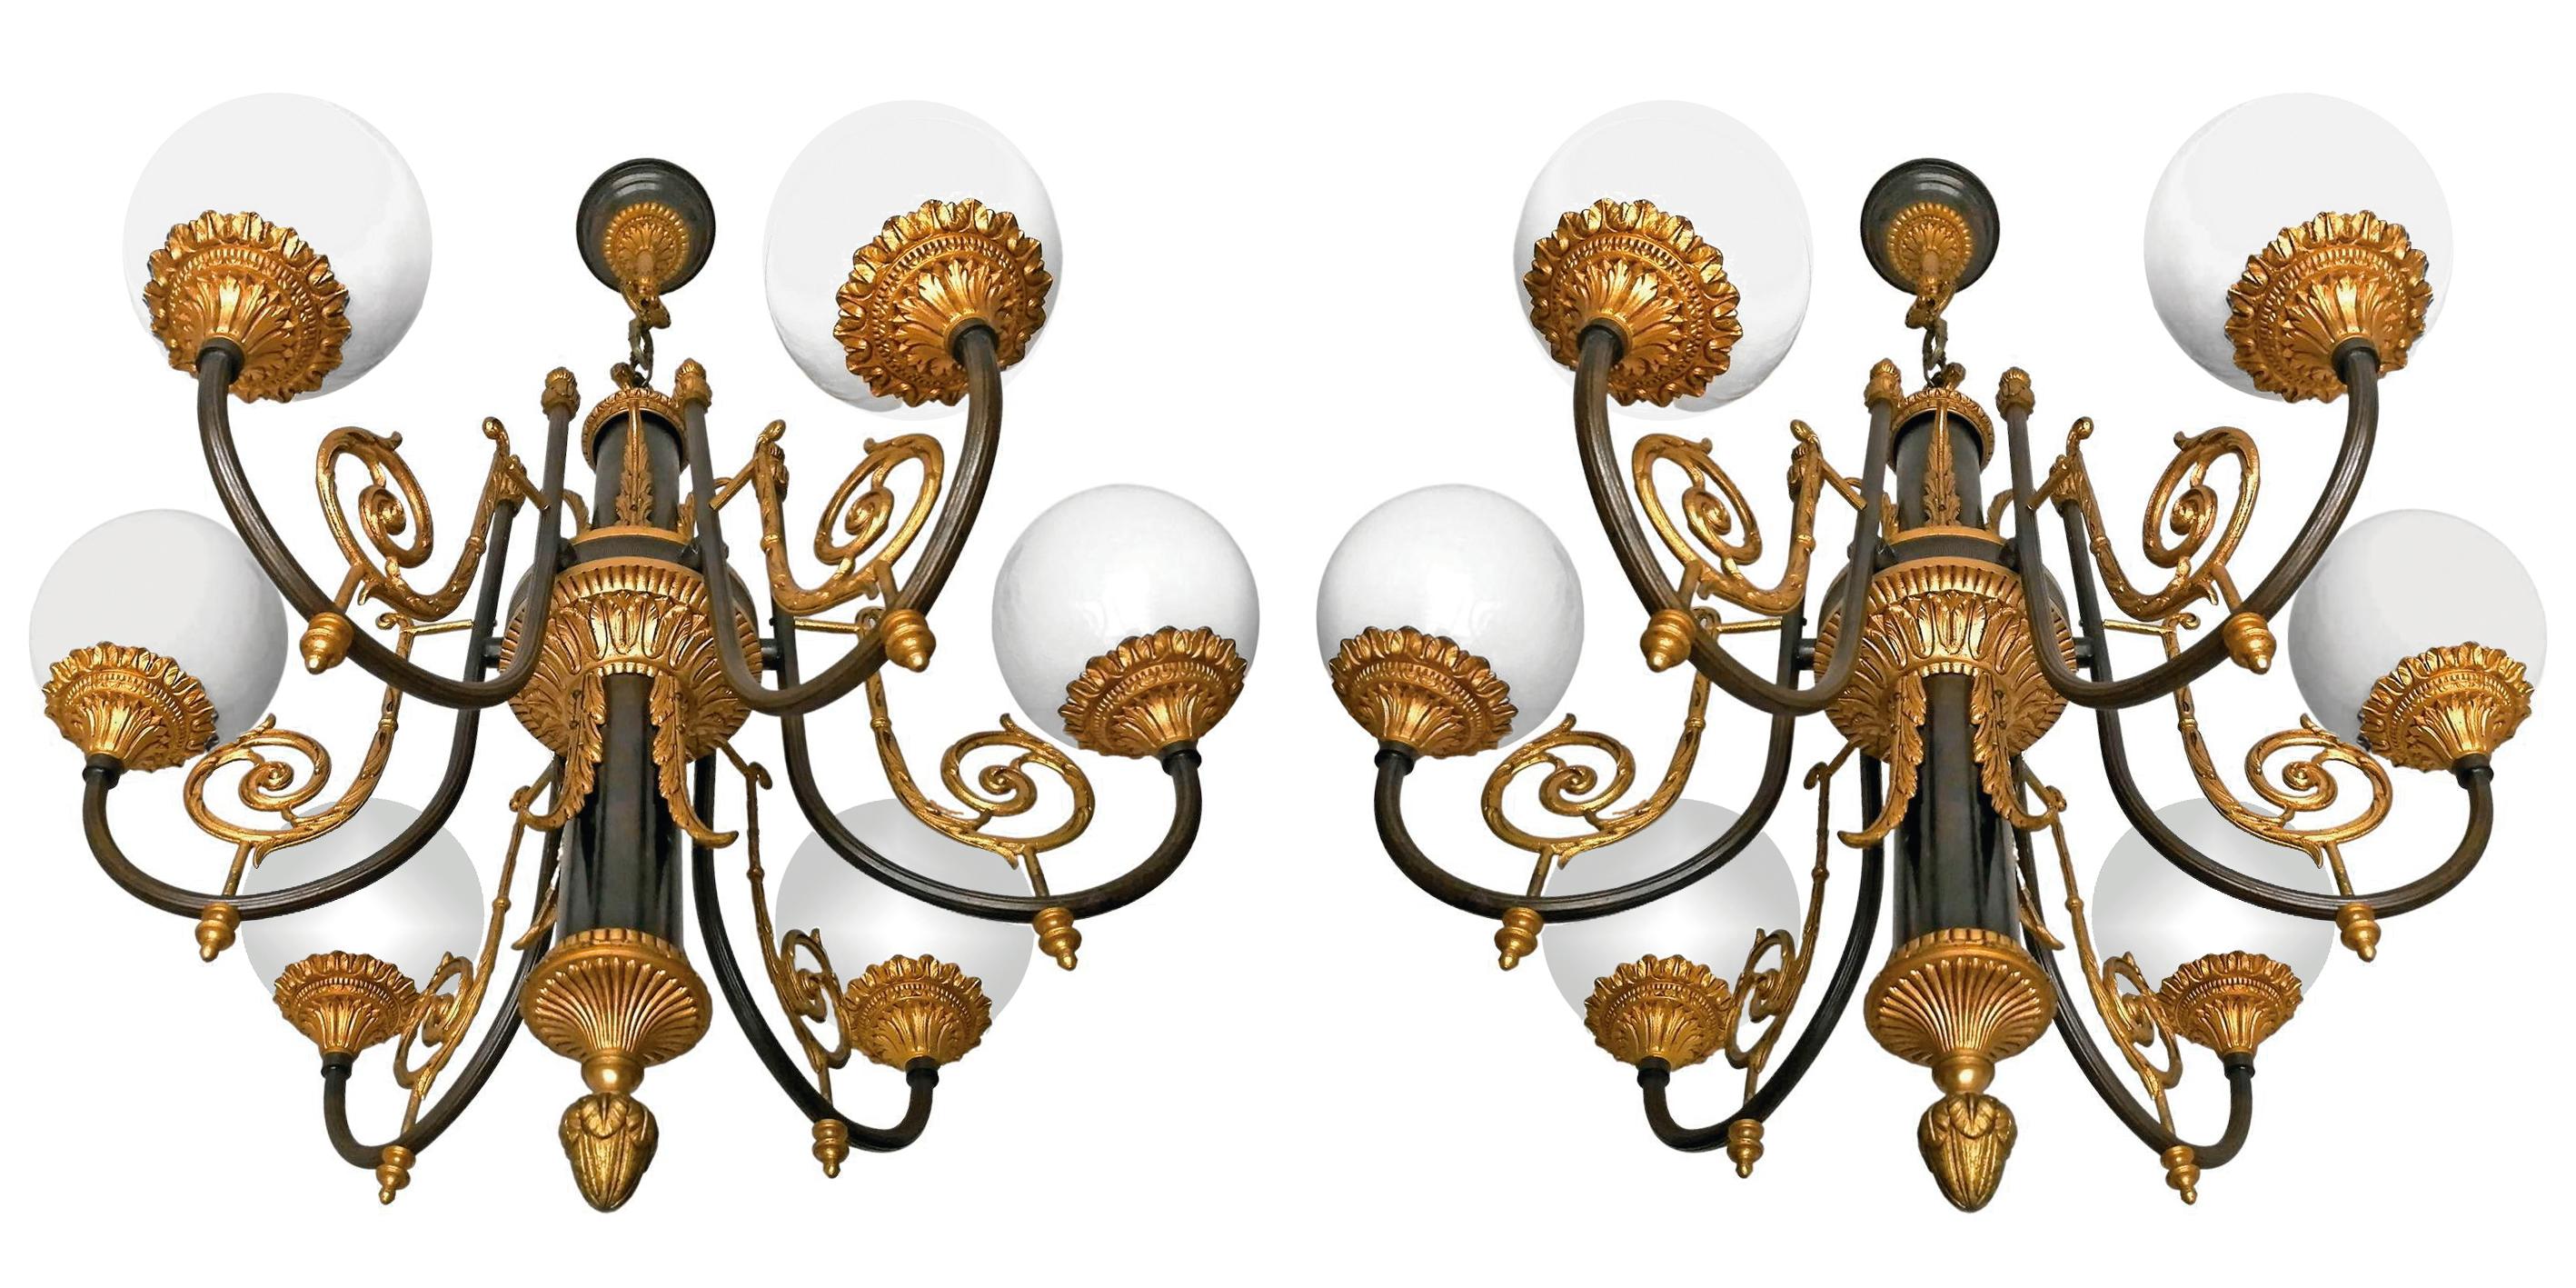 Pair of Antique French Empire Neoclassical Chandelier w Gilt & Patina Bronze PPU In Good Condition For Sale In Coimbra, PT